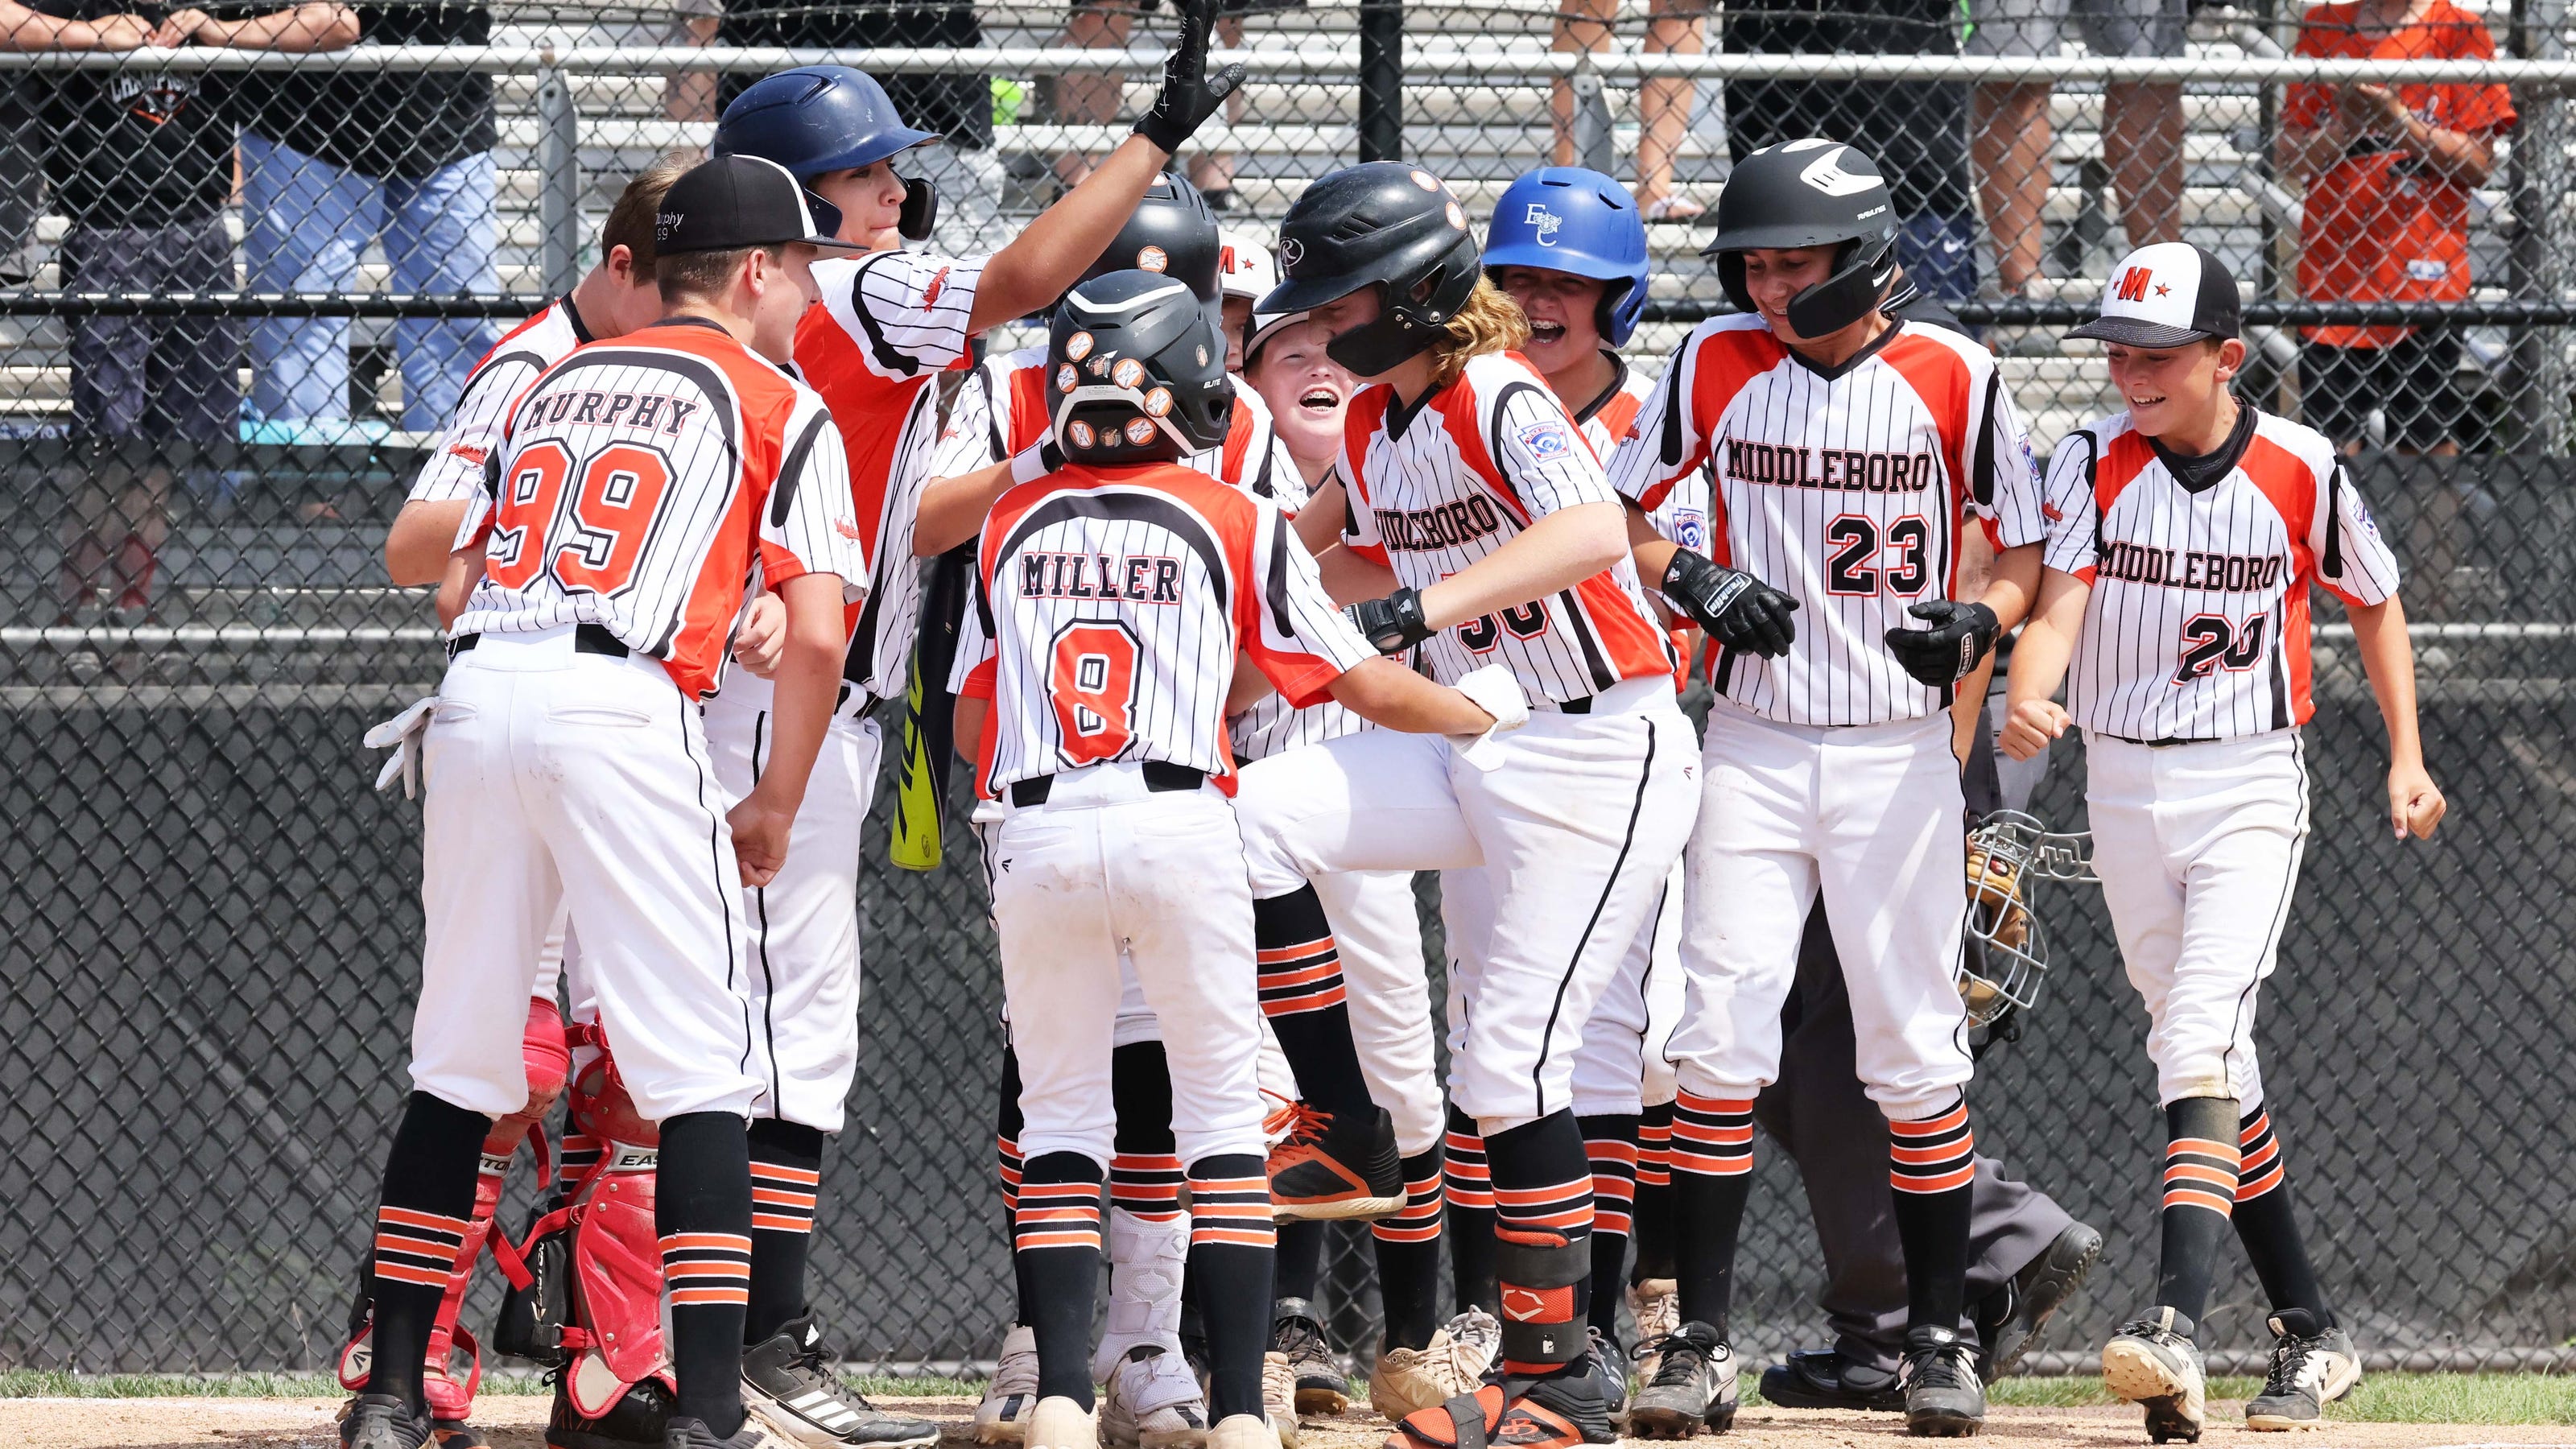 LIVE UPDATES Middleboro Little League faces Maine in winners bracket